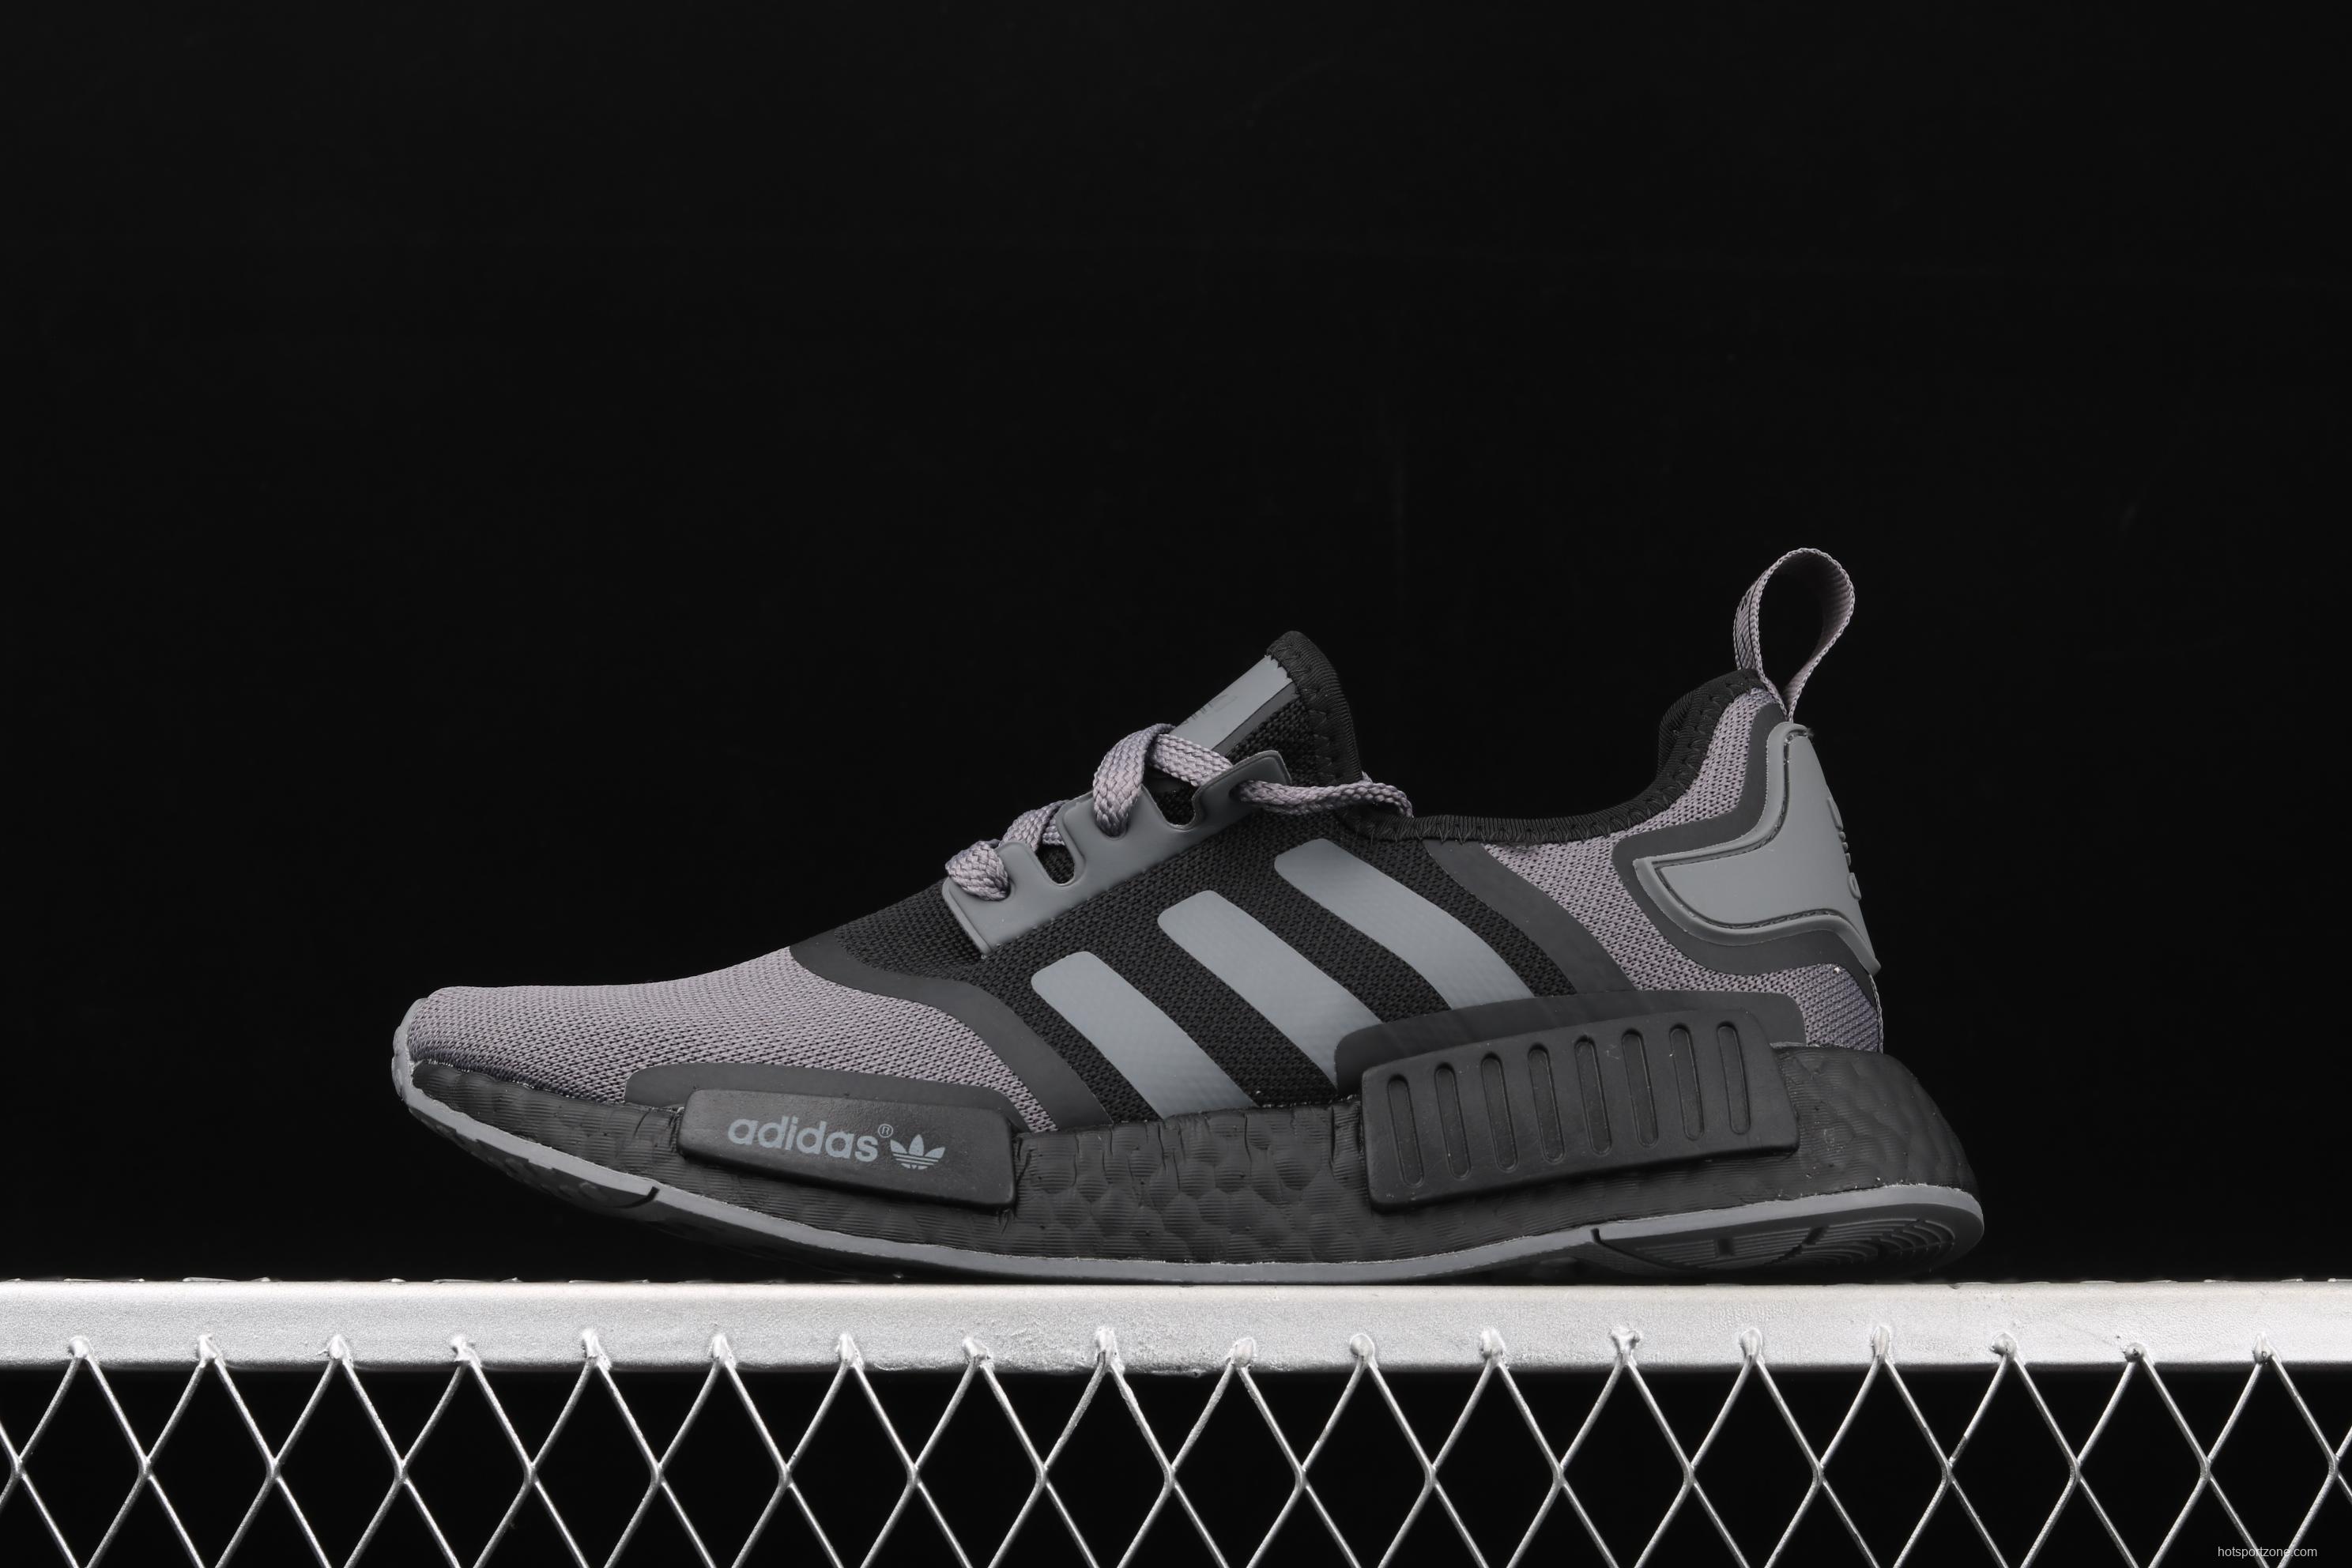 Adidas NMD R1 Boost FV1733's new really hot casual running shoes